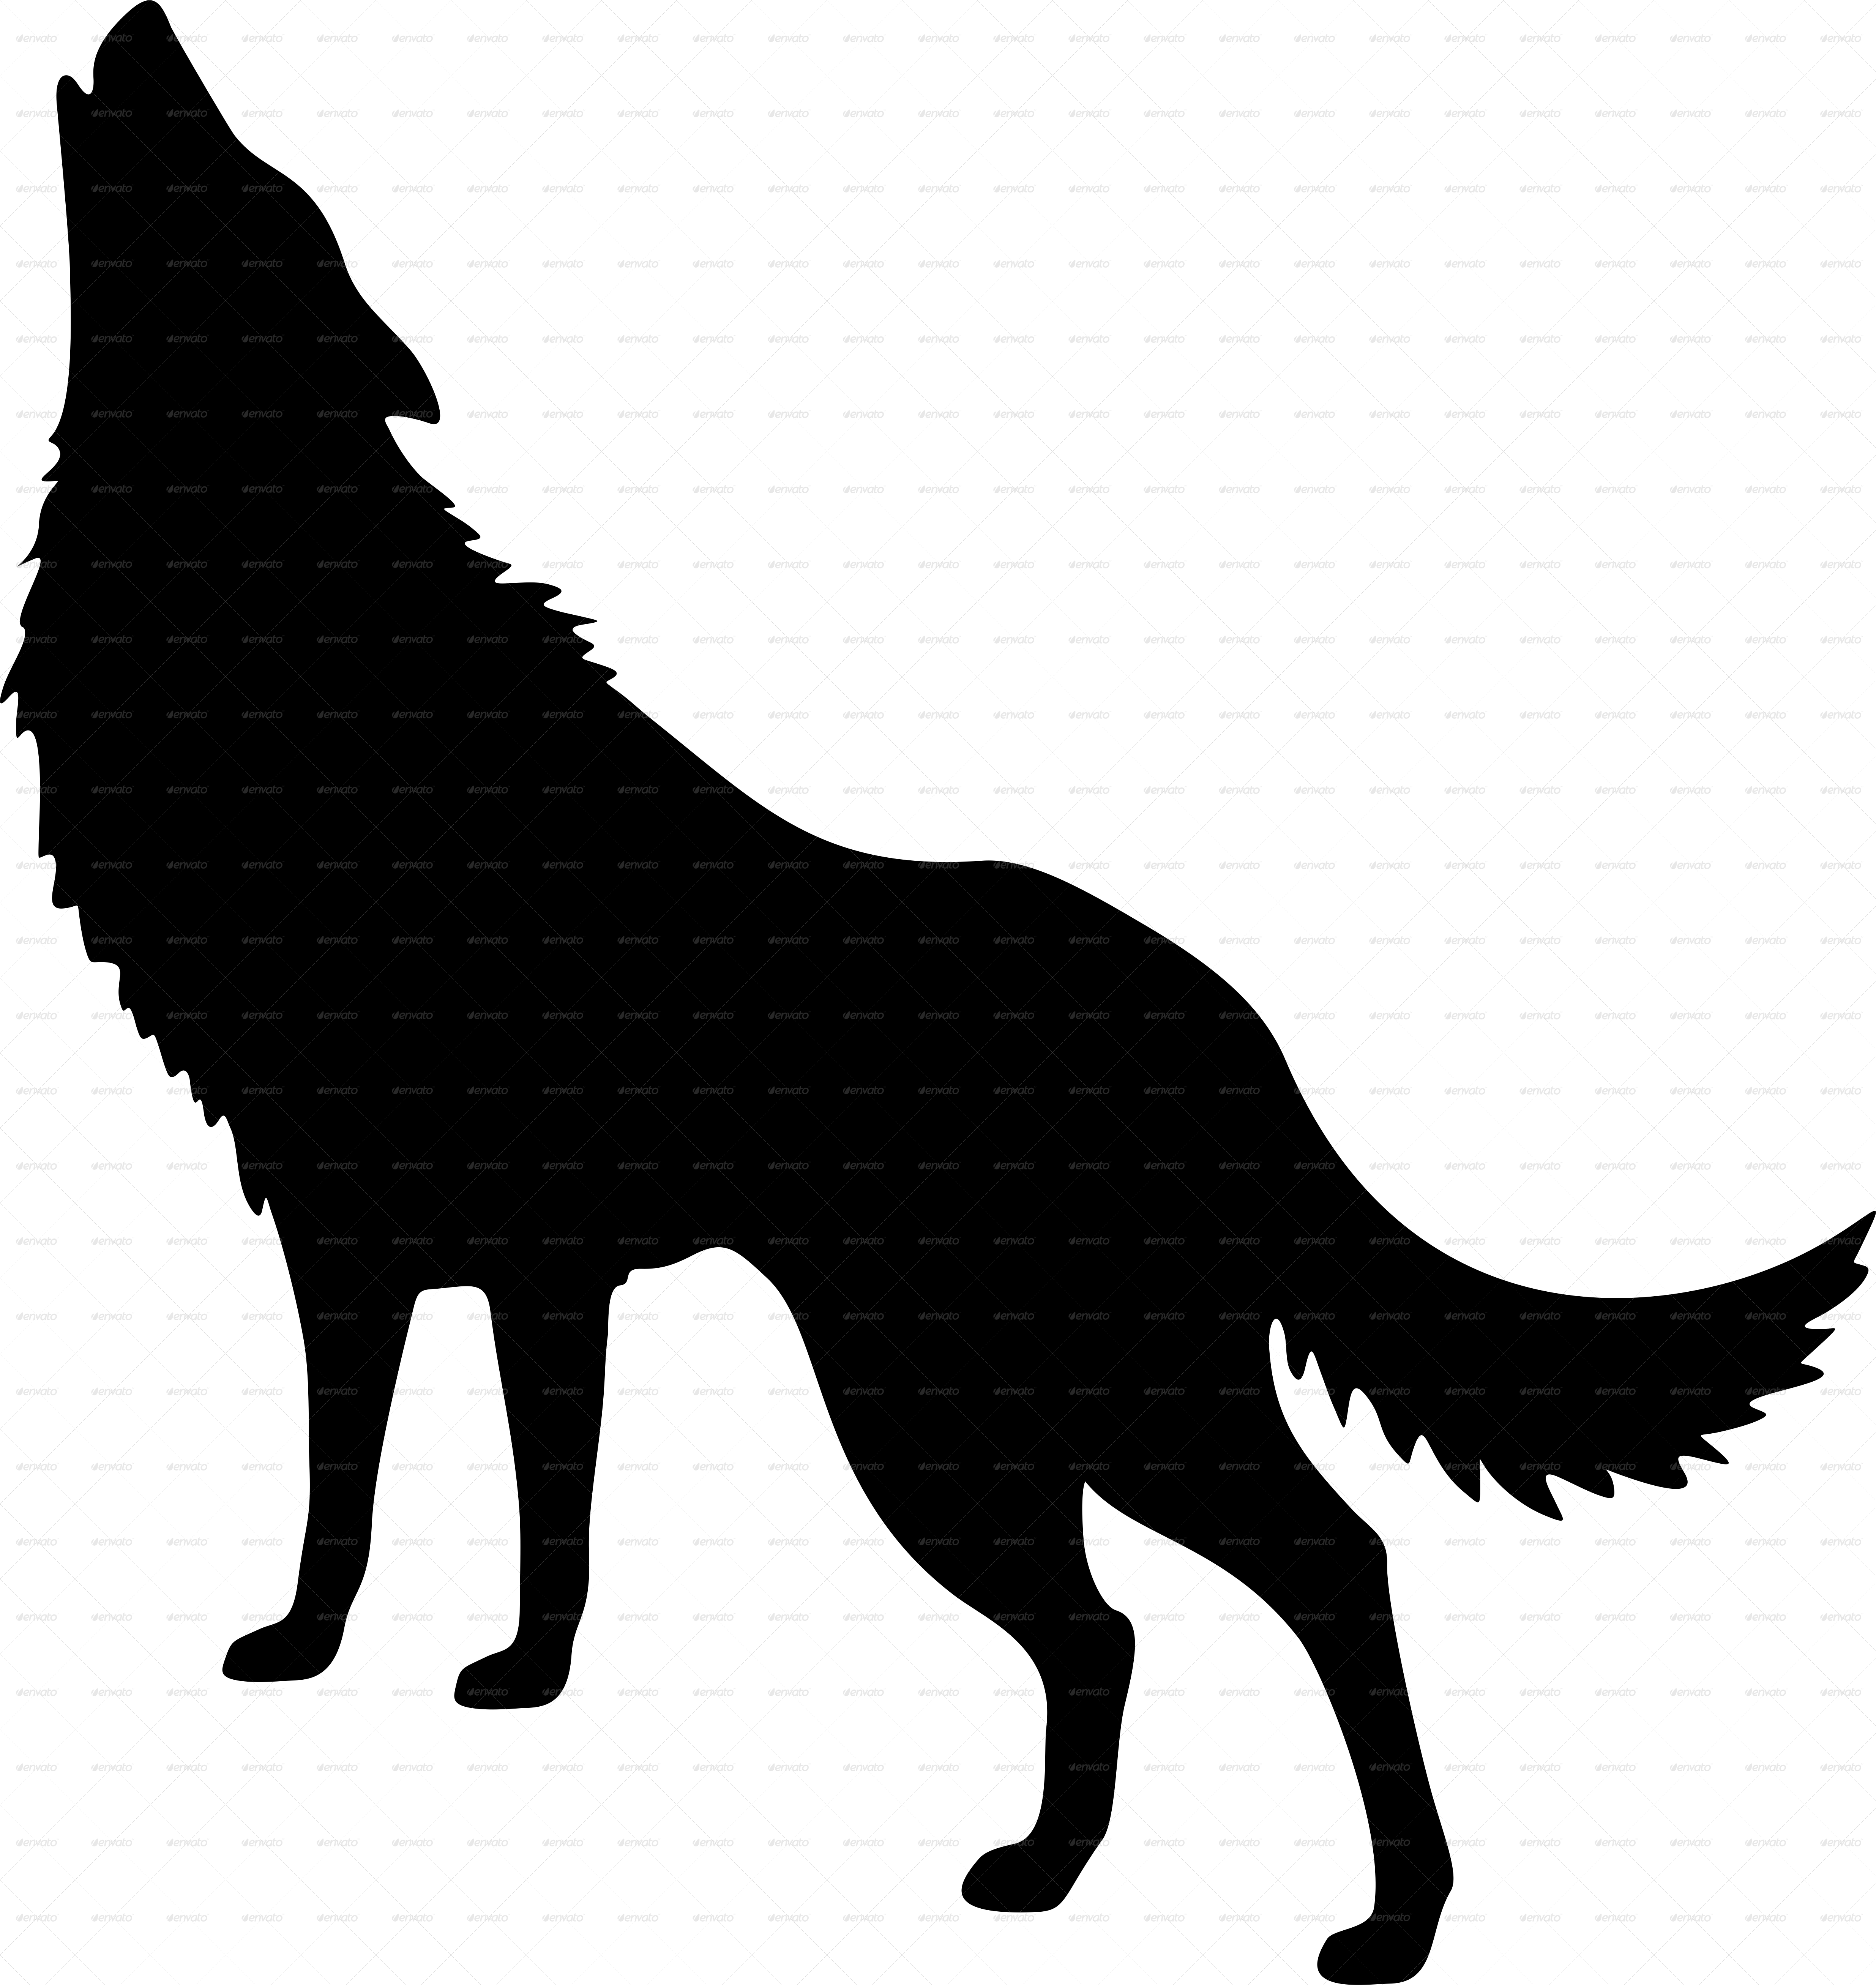 Silhouette Of Wolf Howling at GetDrawings | Free download